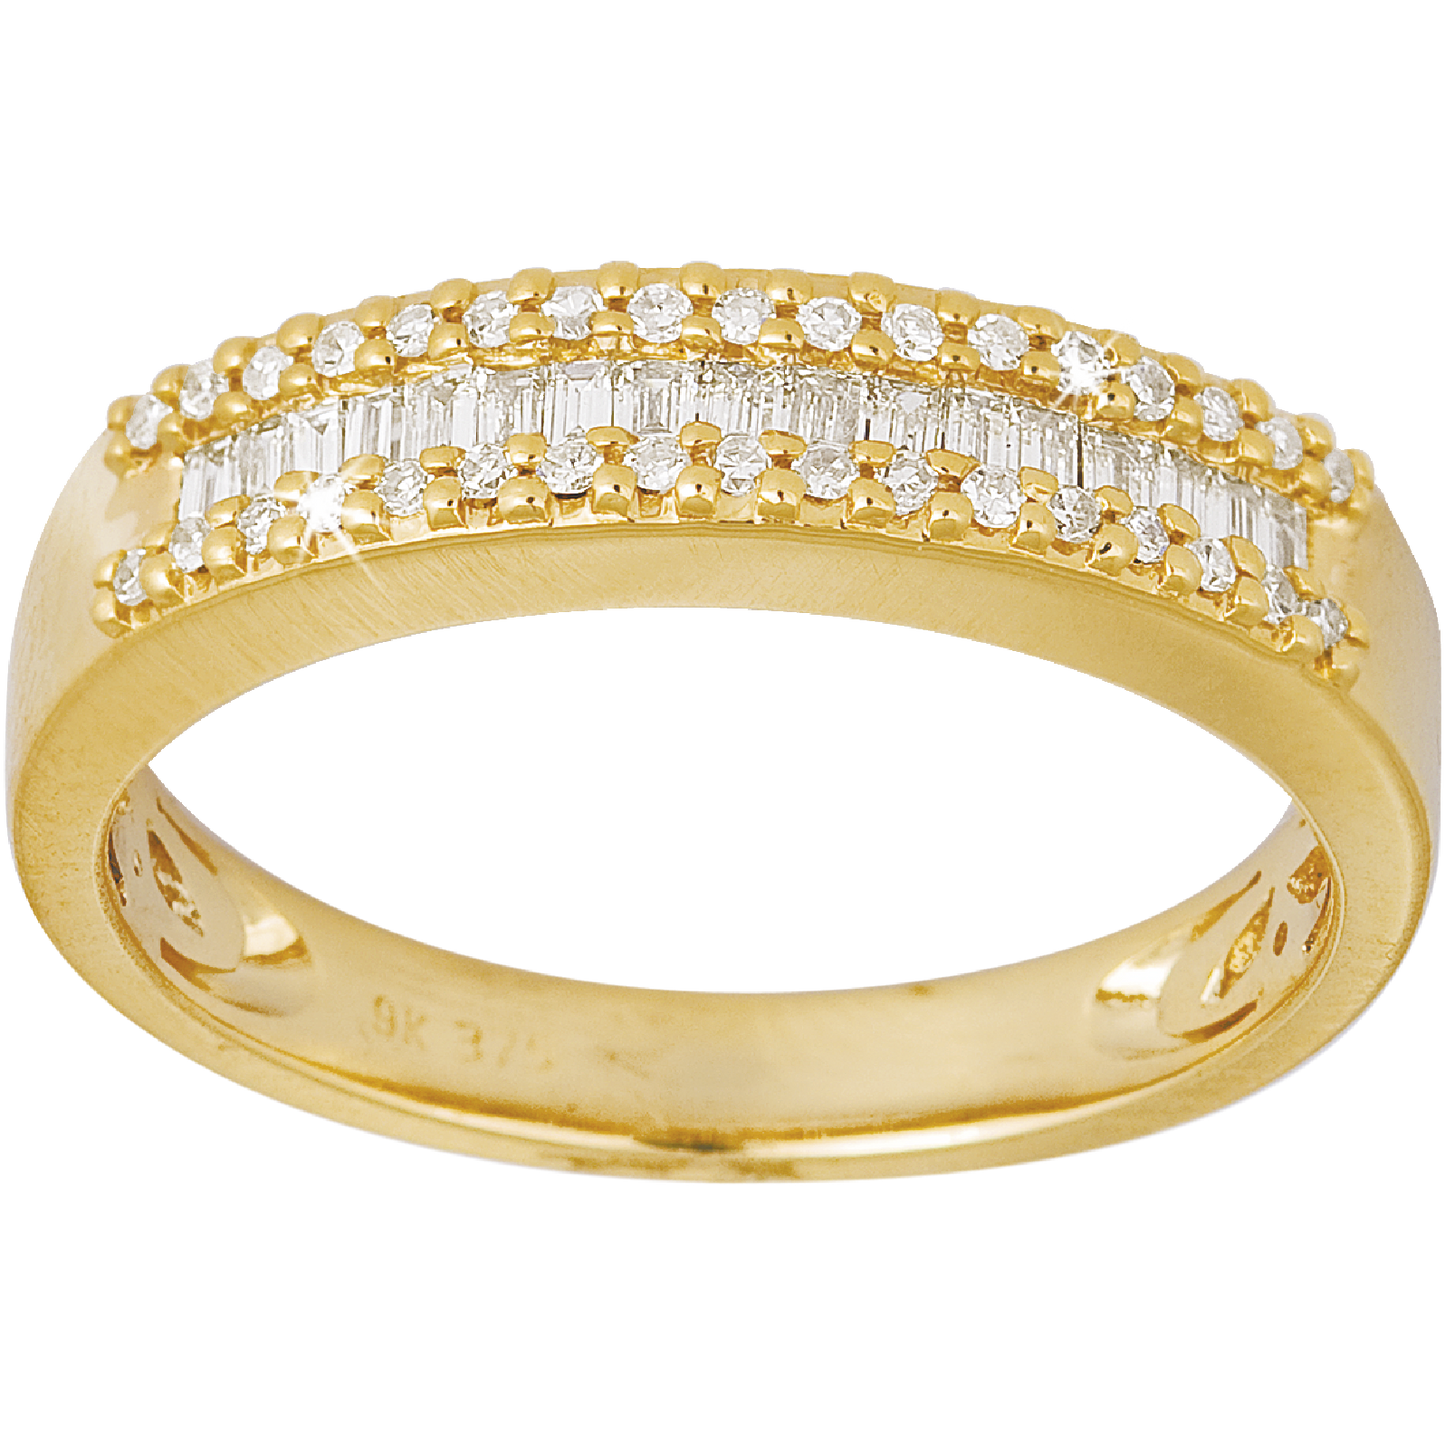 0.27ct Diamond Baguette Eternity Ring in 9ct Yellow Gold